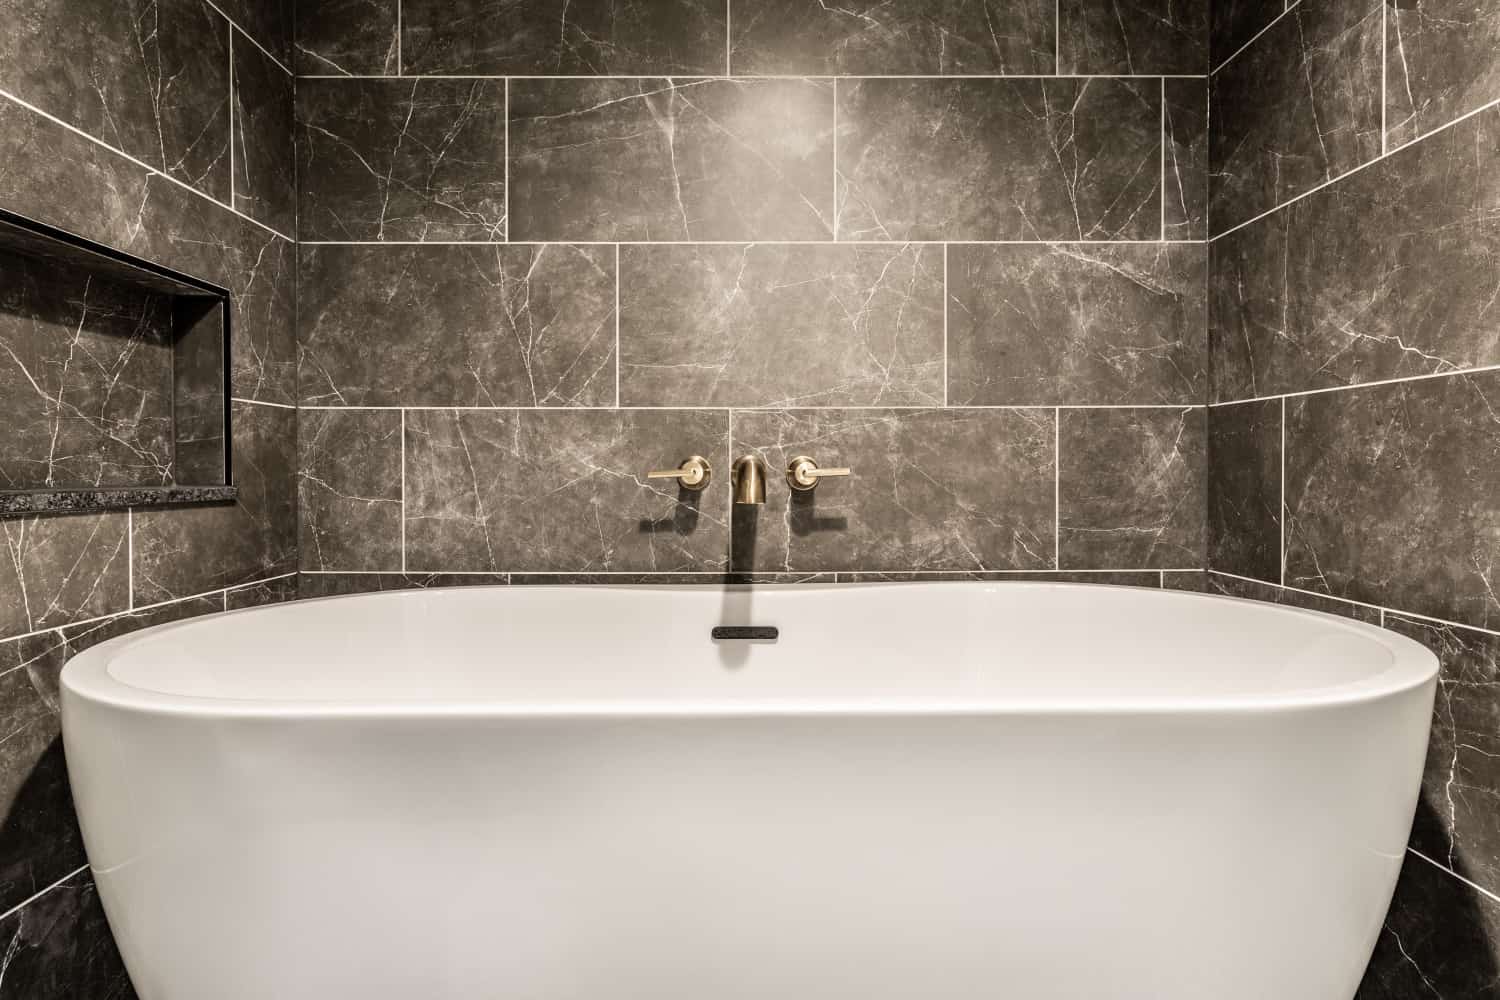 Nicholas Design Build | Remodel: A remodeled bathroom featuring a white bathtub and tiled walls.